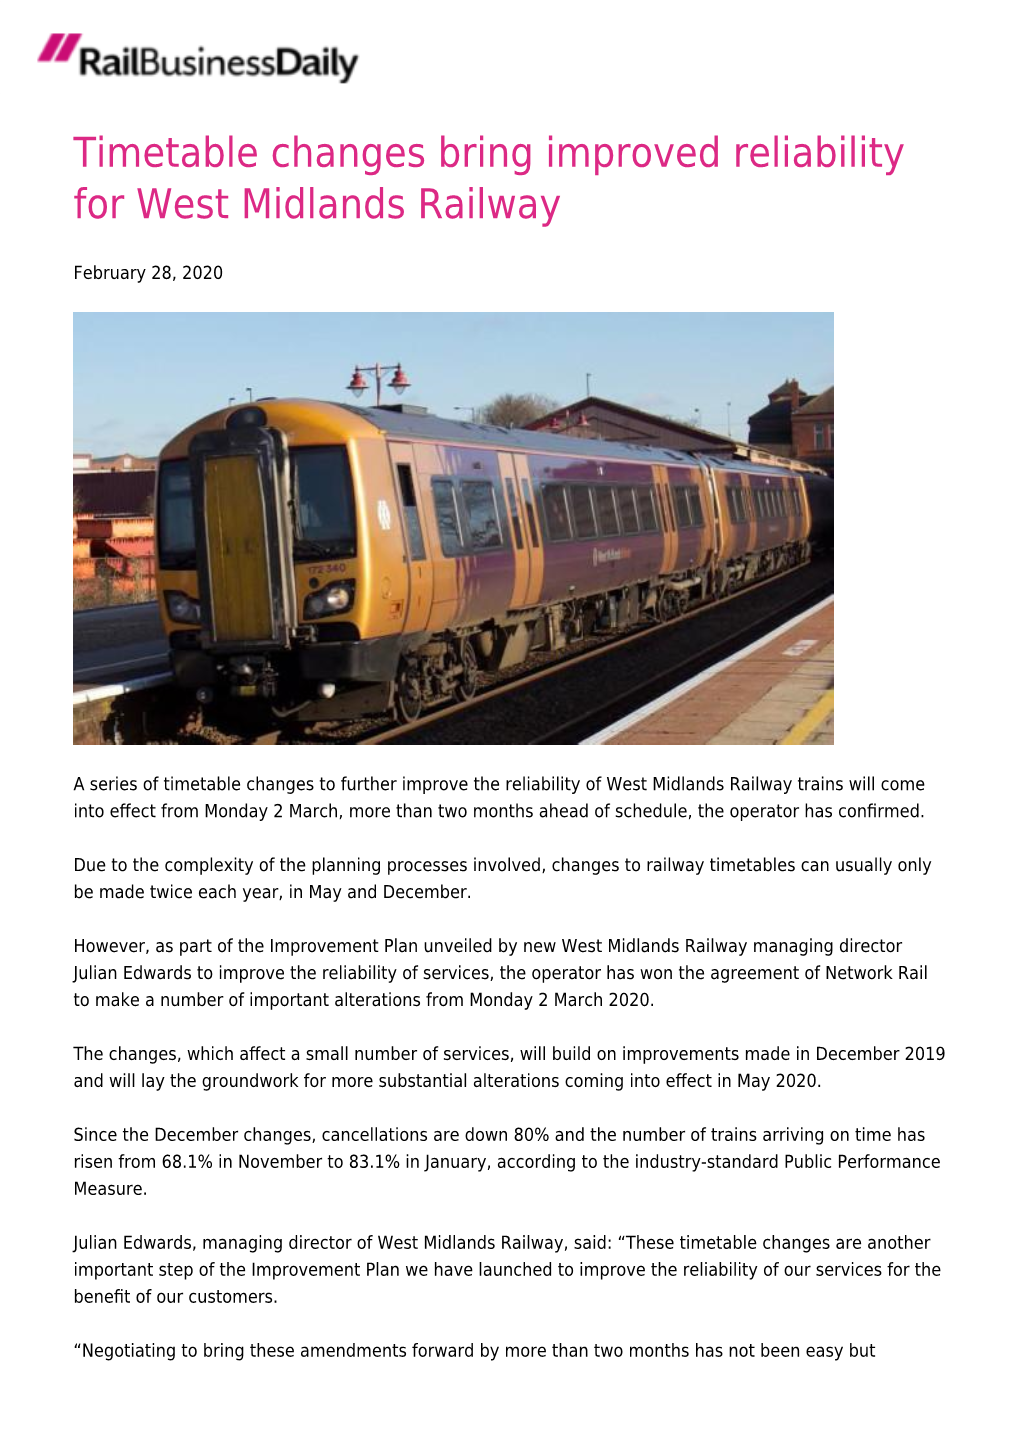 Timetable Changes Bring Improved Reliability for West Midlands Railway